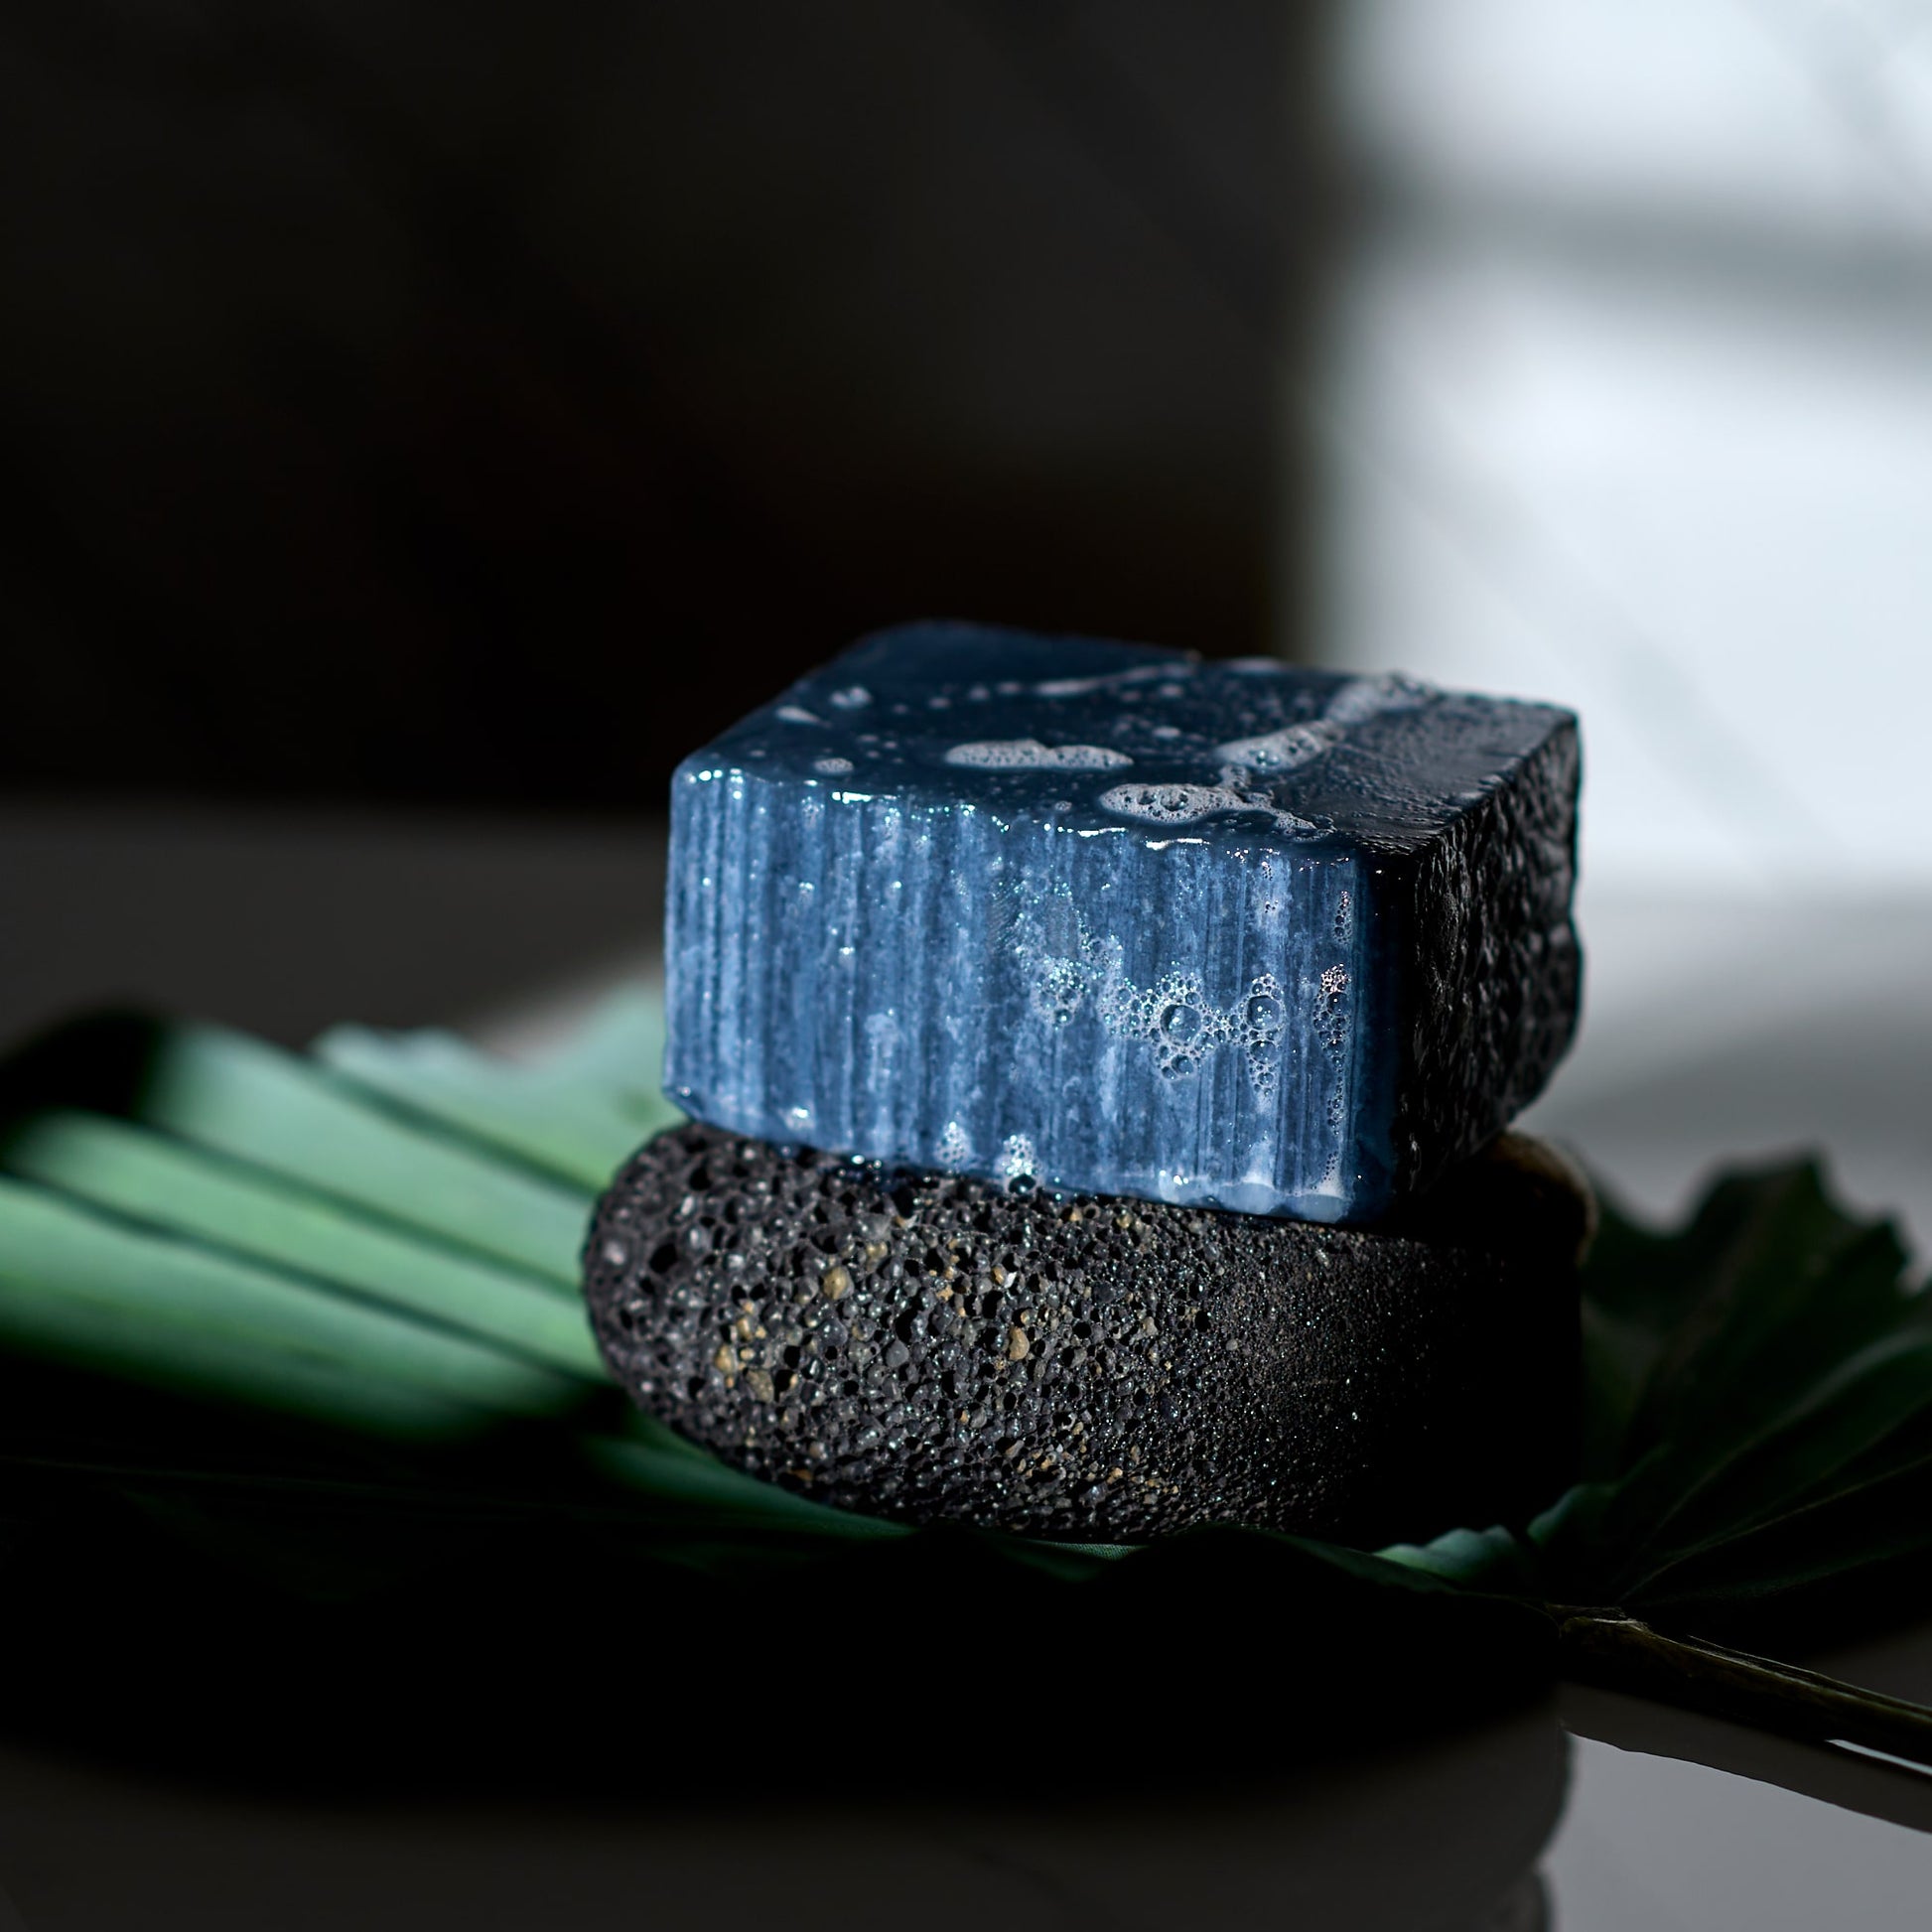 In the Clear - Detoxifying Healing Activating Eco Soap - Blue Heron Soap Co